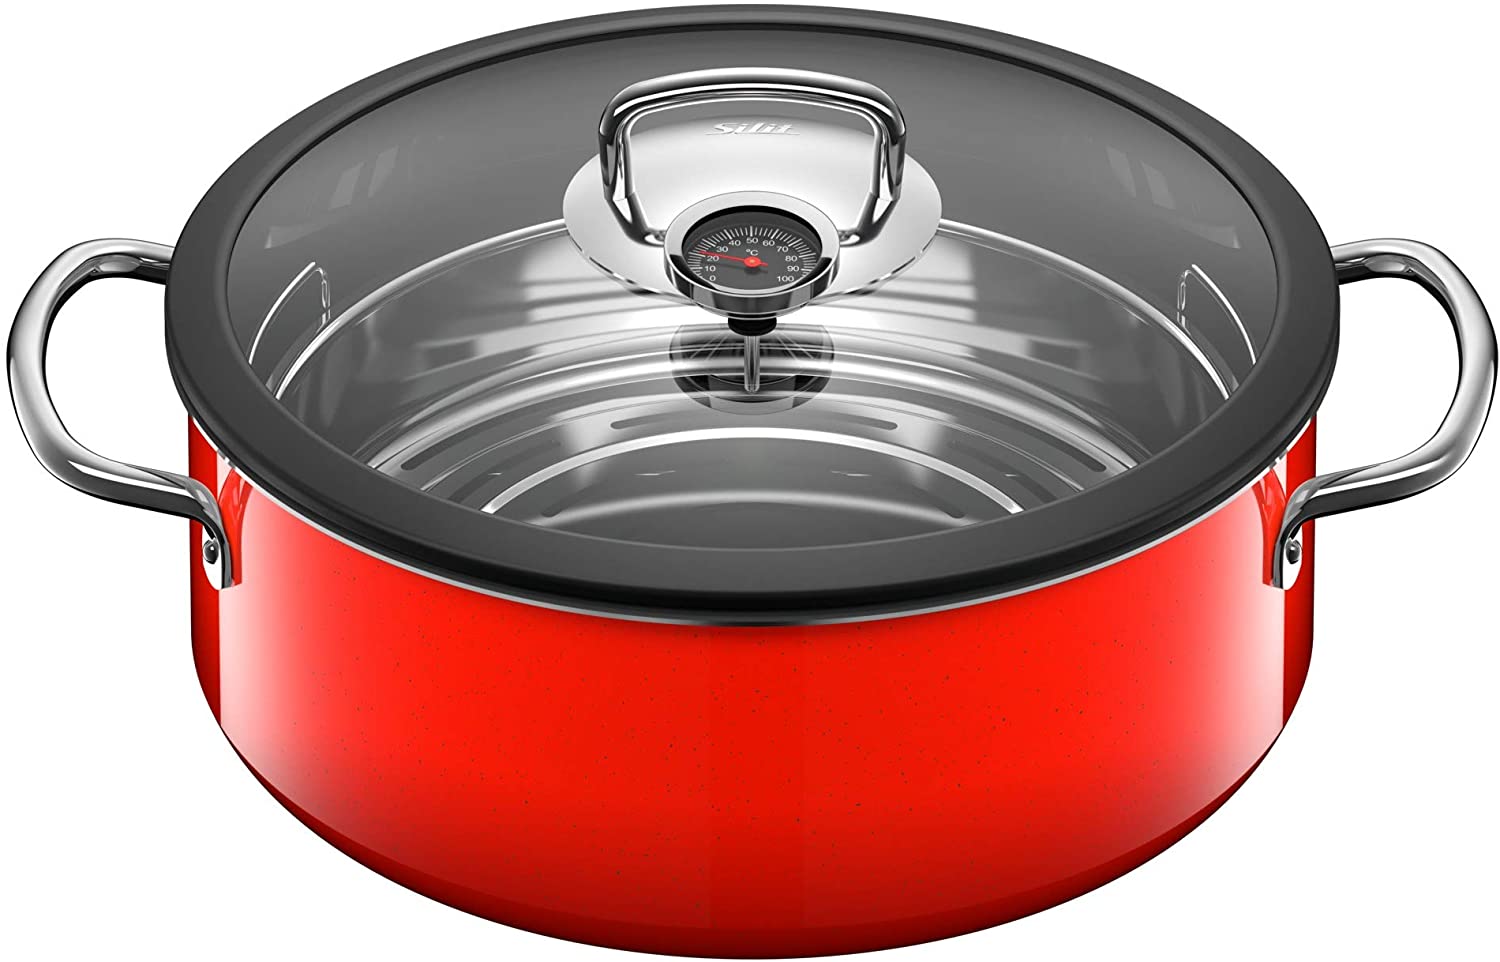 Silit ecompact Steamer, Roasting Dish Induction 28 cm with Glass Lid, 6 L, Cooking Thermometer, Cooking Tray, Silargan Functional Ceramic, Red